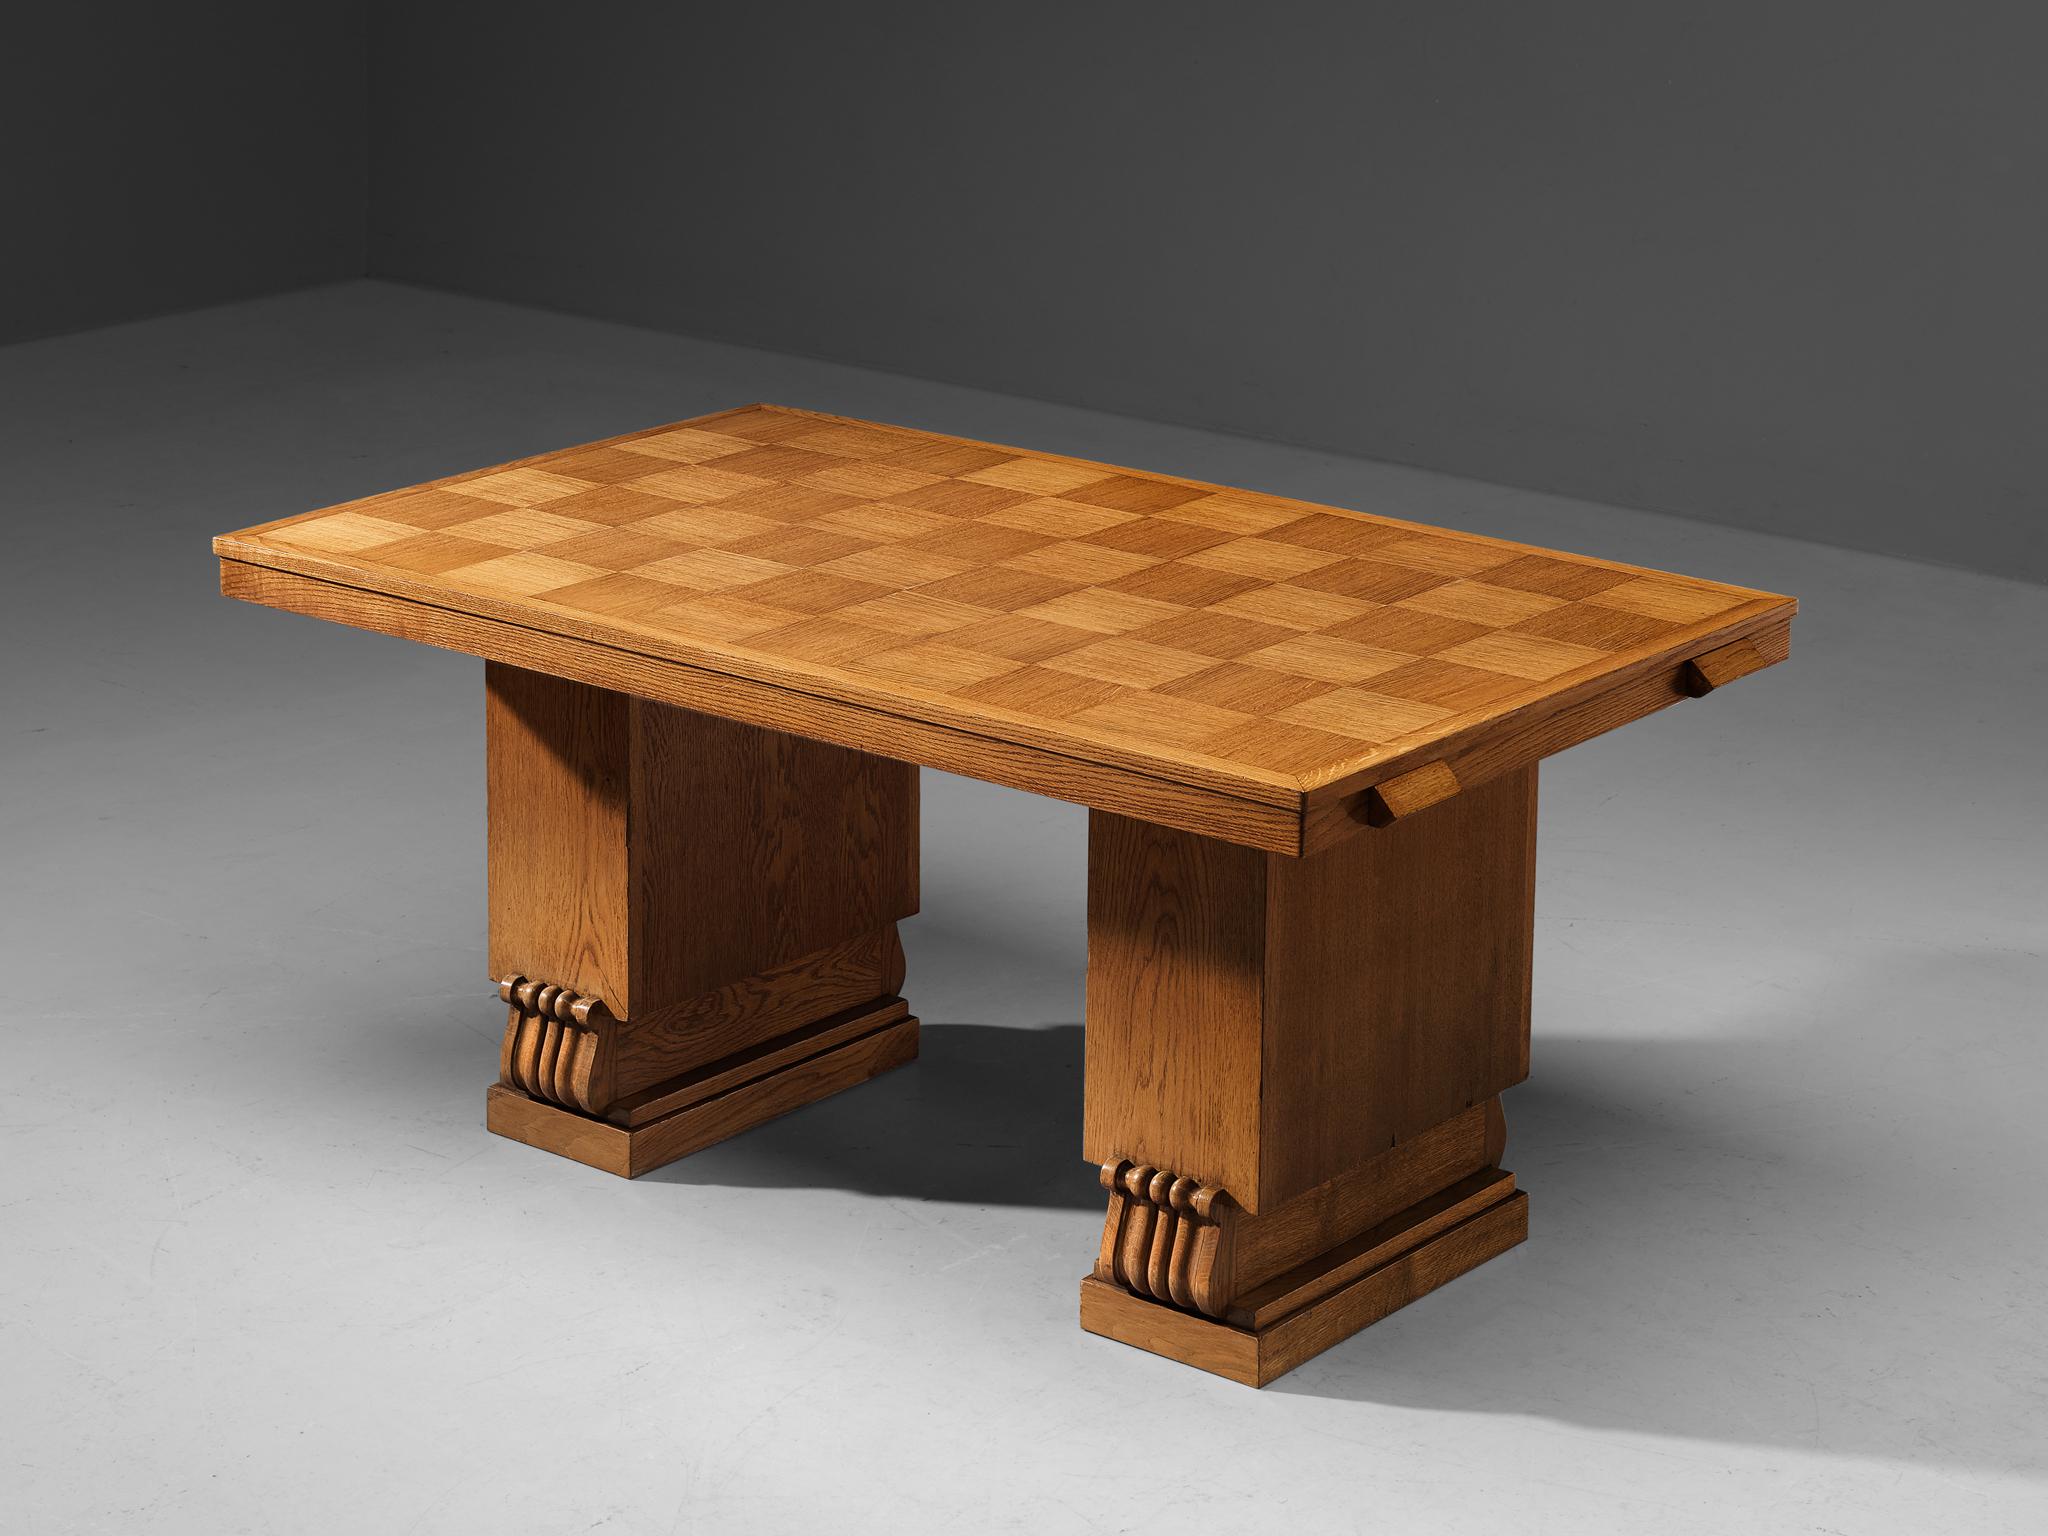 Charles Dudouyt, dining table, oak, France, 1940s.

This well-designed dining table is architectural in its structure and alludes to the stylistics traits of the artistic Art Deco movement of the 1940s. The top has a checkered pattern that is